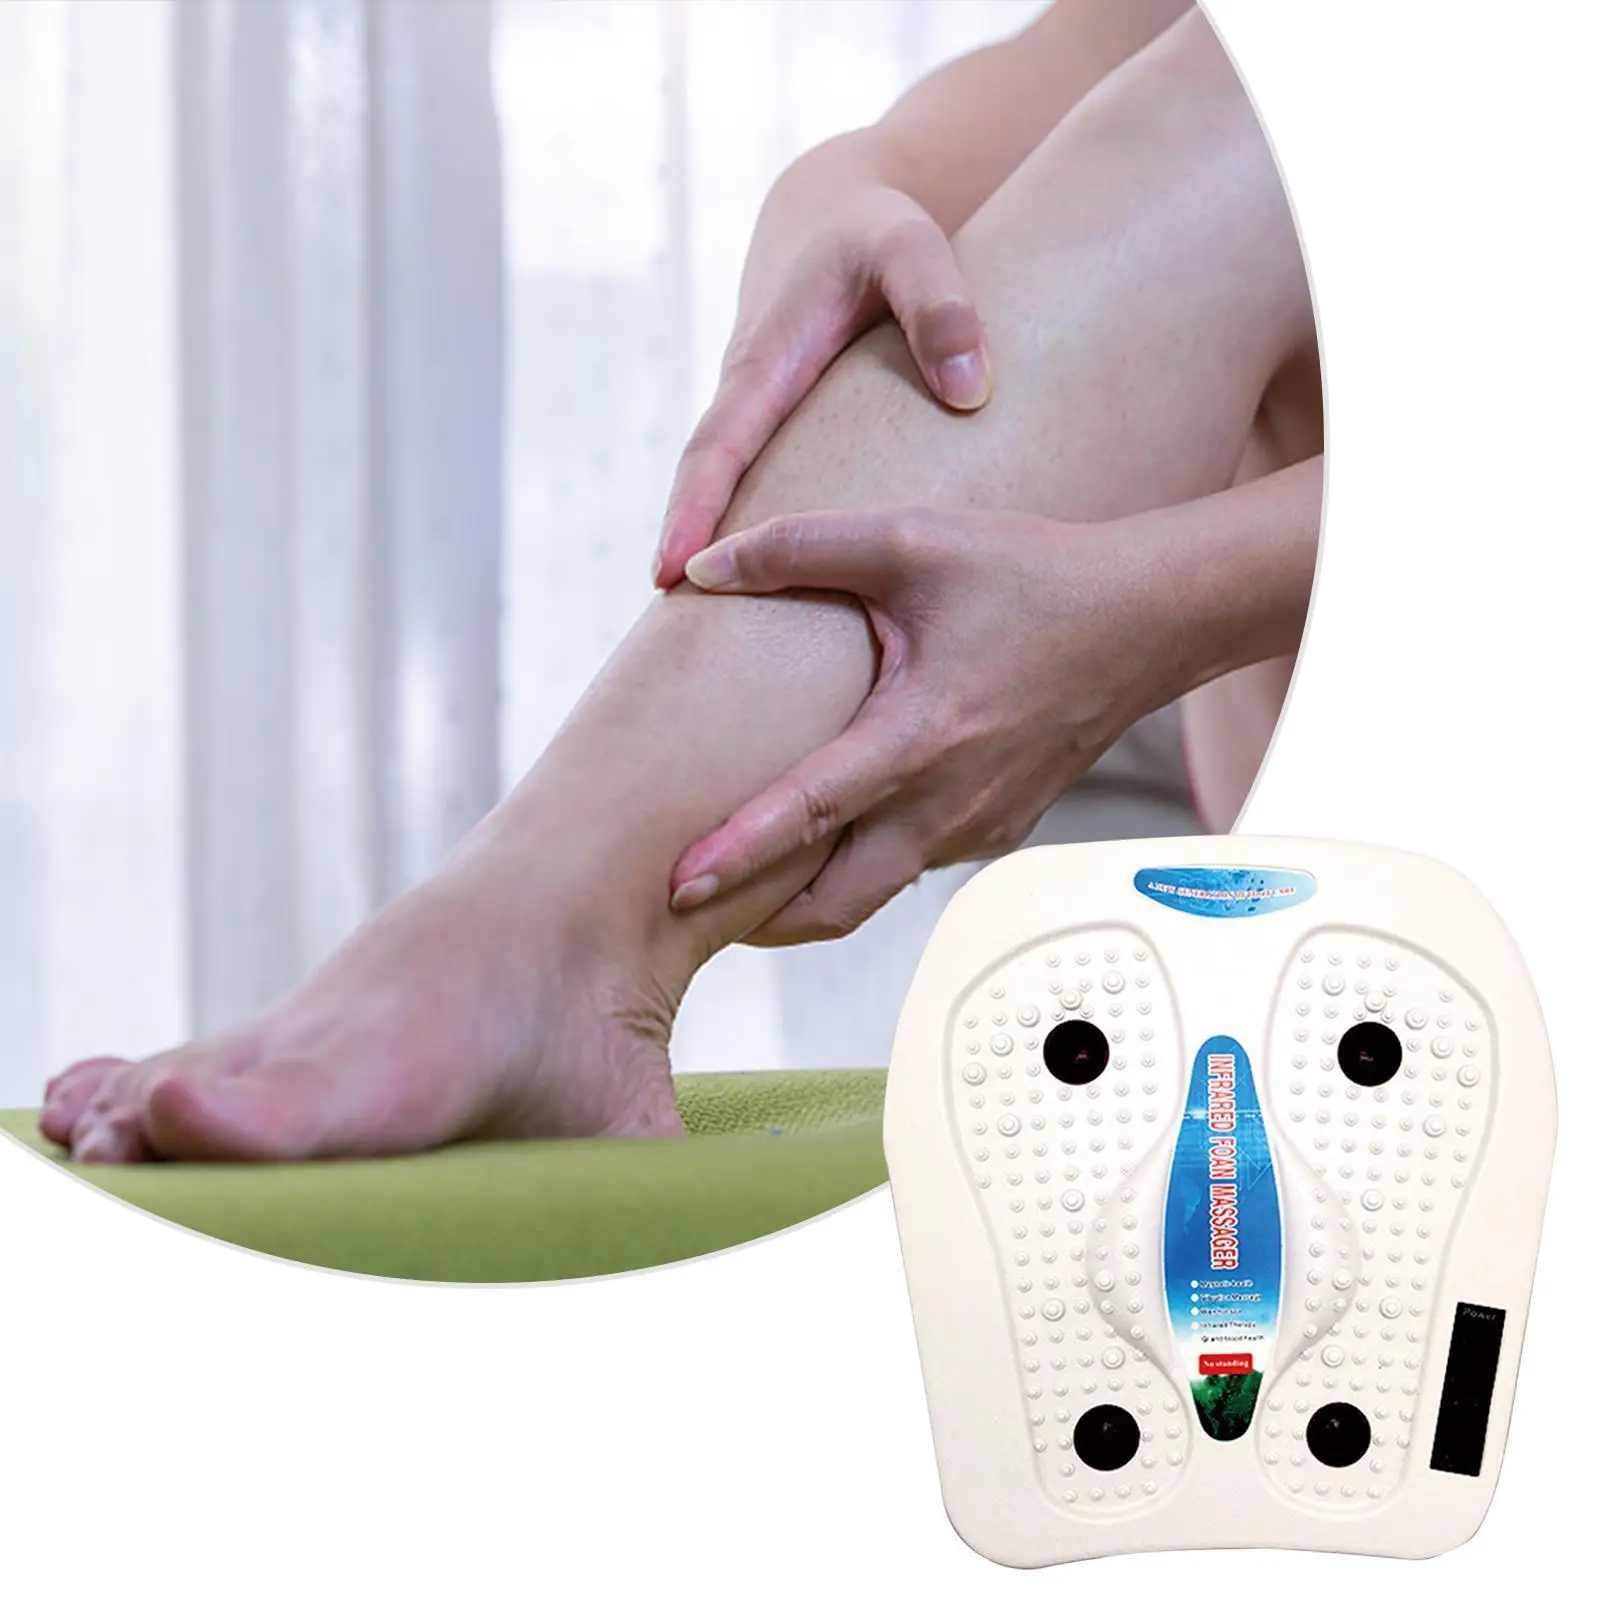 

Electric Foot Massager Vibration Infrared Heating Therapy Relieve Blood Instrument Foot Spa Relax Fatigue Circulation Massa K7M3